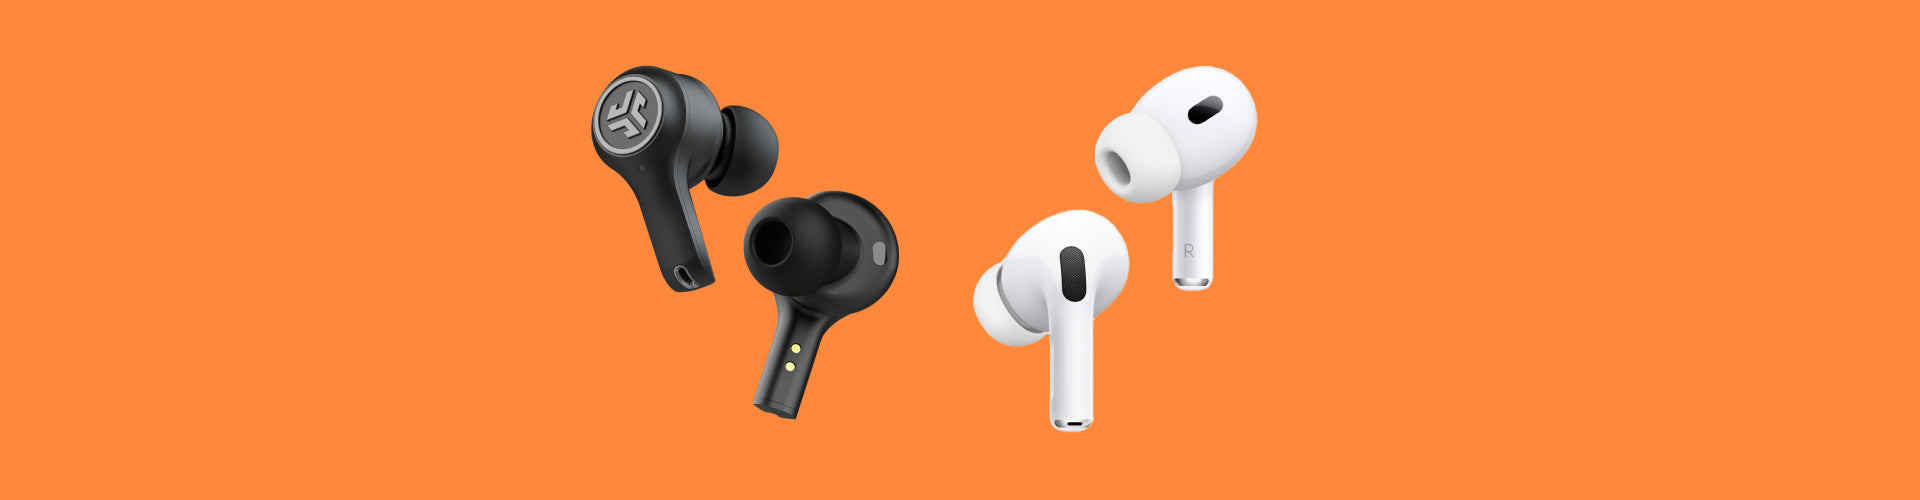 Which wireless earbuds are better than Apple's Airpods Pro?